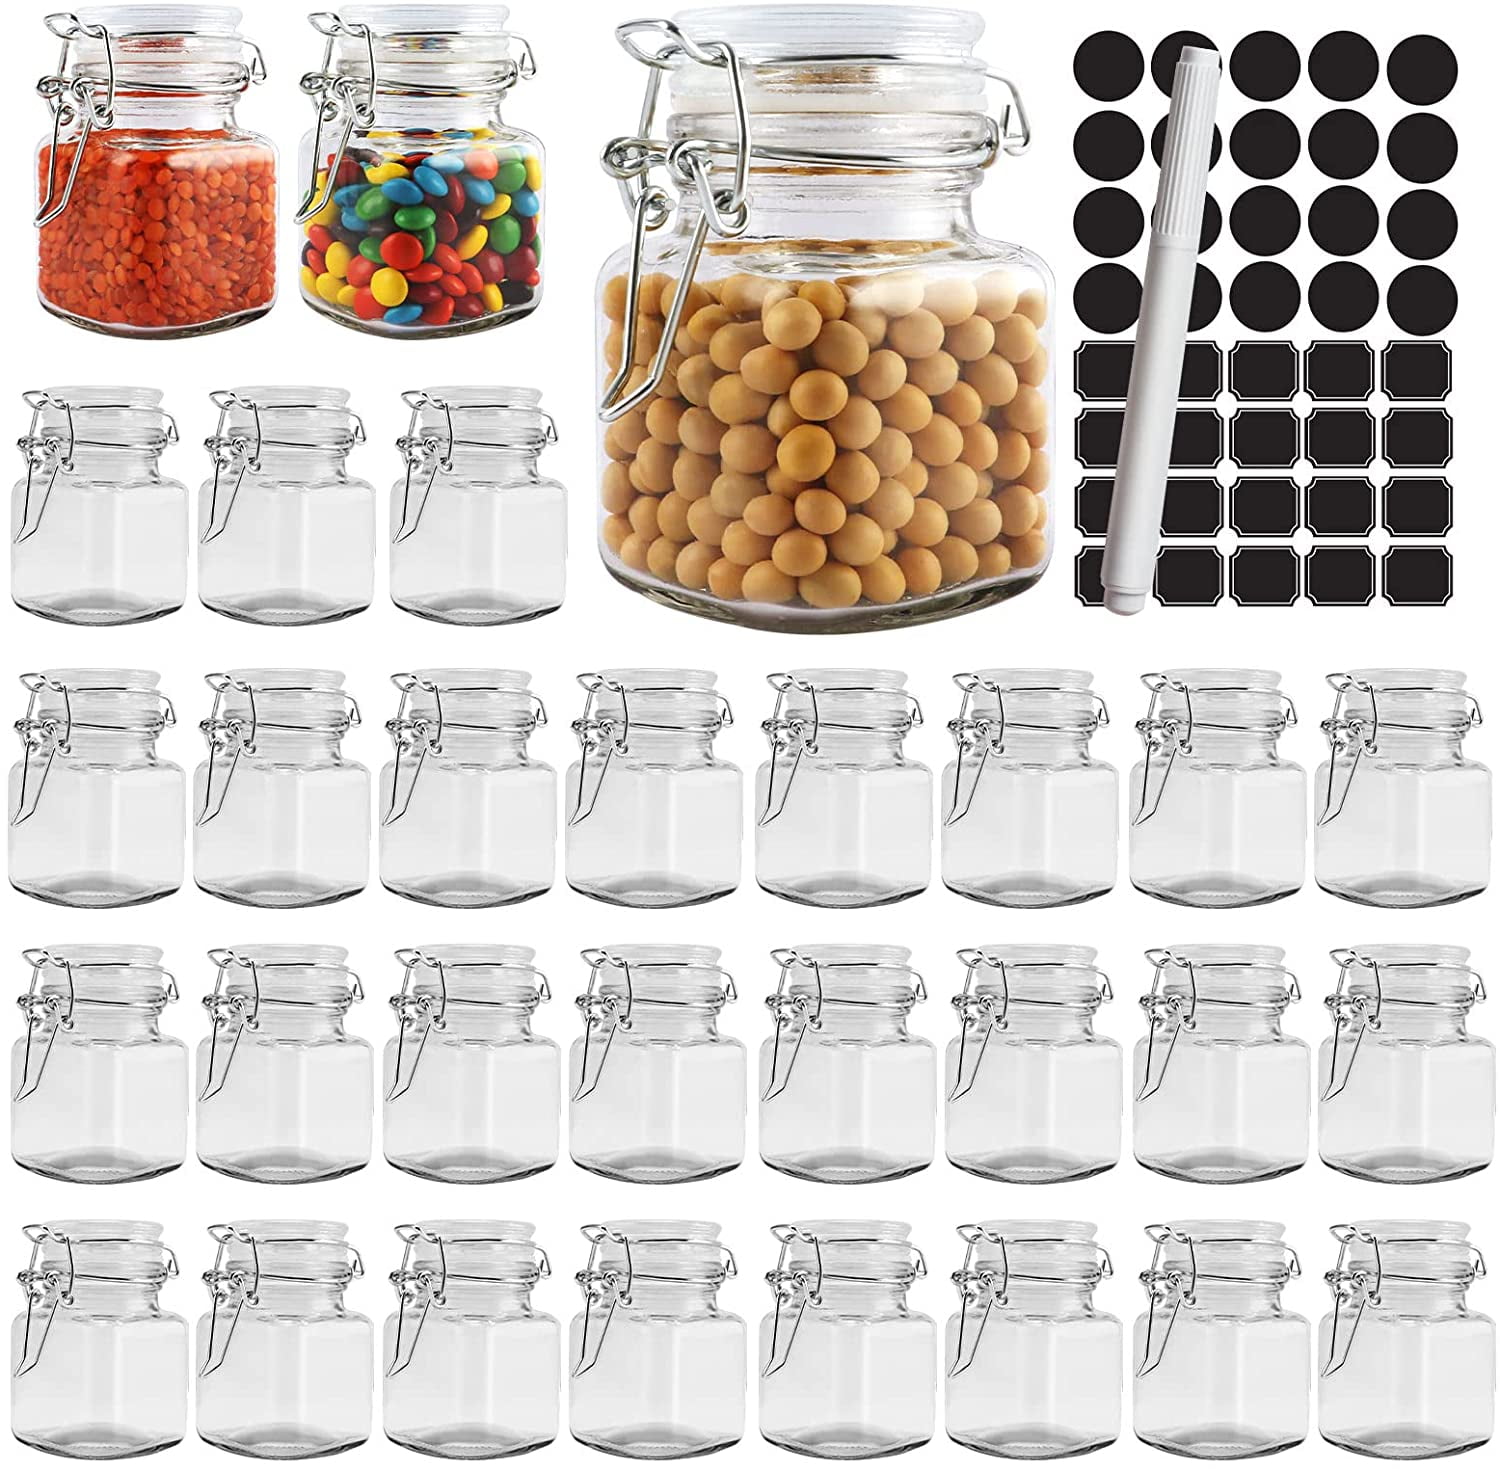 Set of 20 Small Clear Storage Container Bottles 3.5oz Airtight Glass Jars 